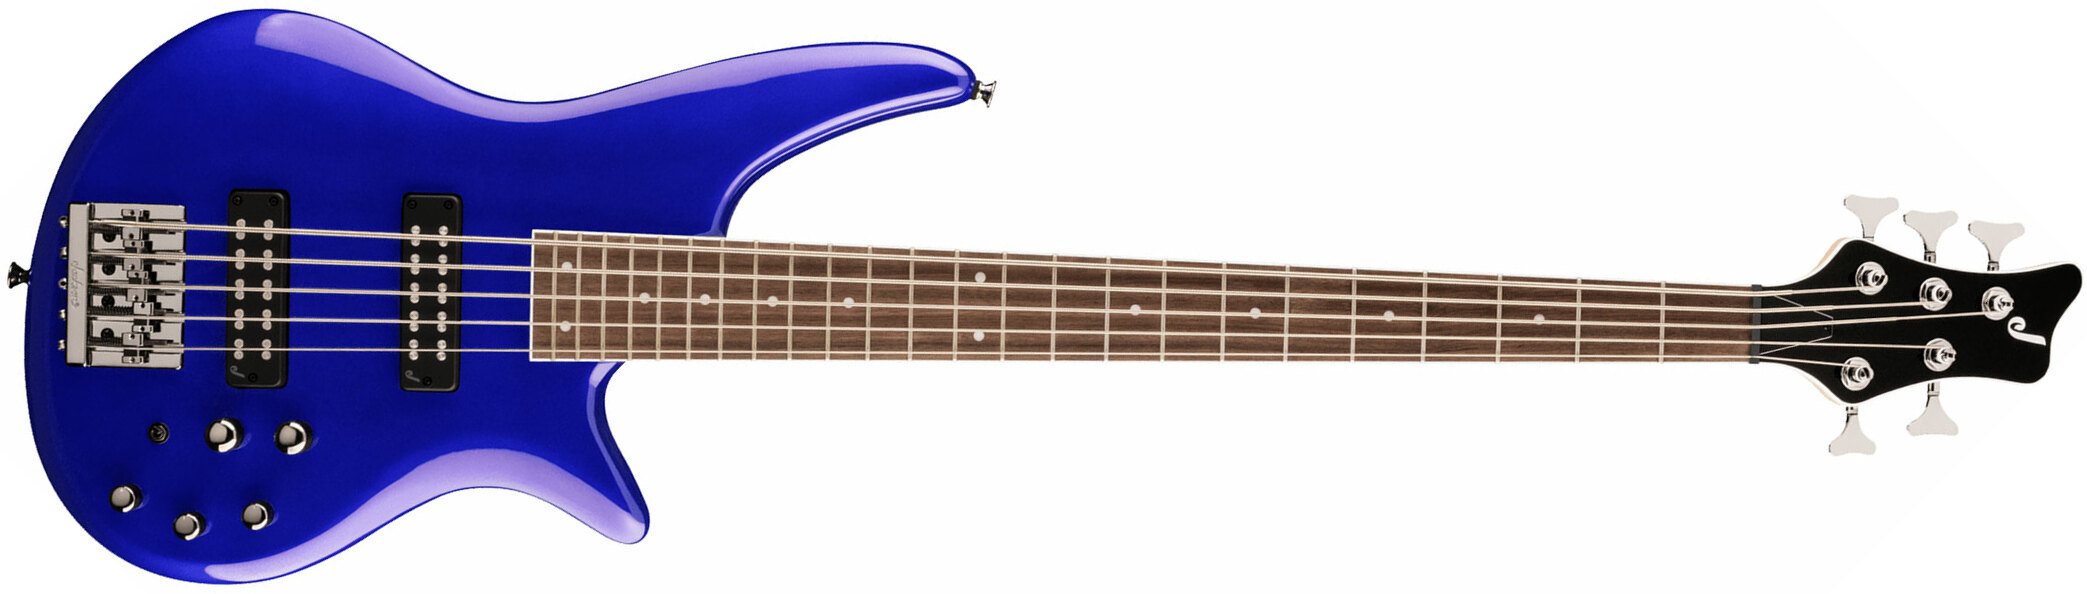 Jackson Spectra Bass Js3v 5c Active Lau - Indigo Blue - Solid body electric bass - Main picture